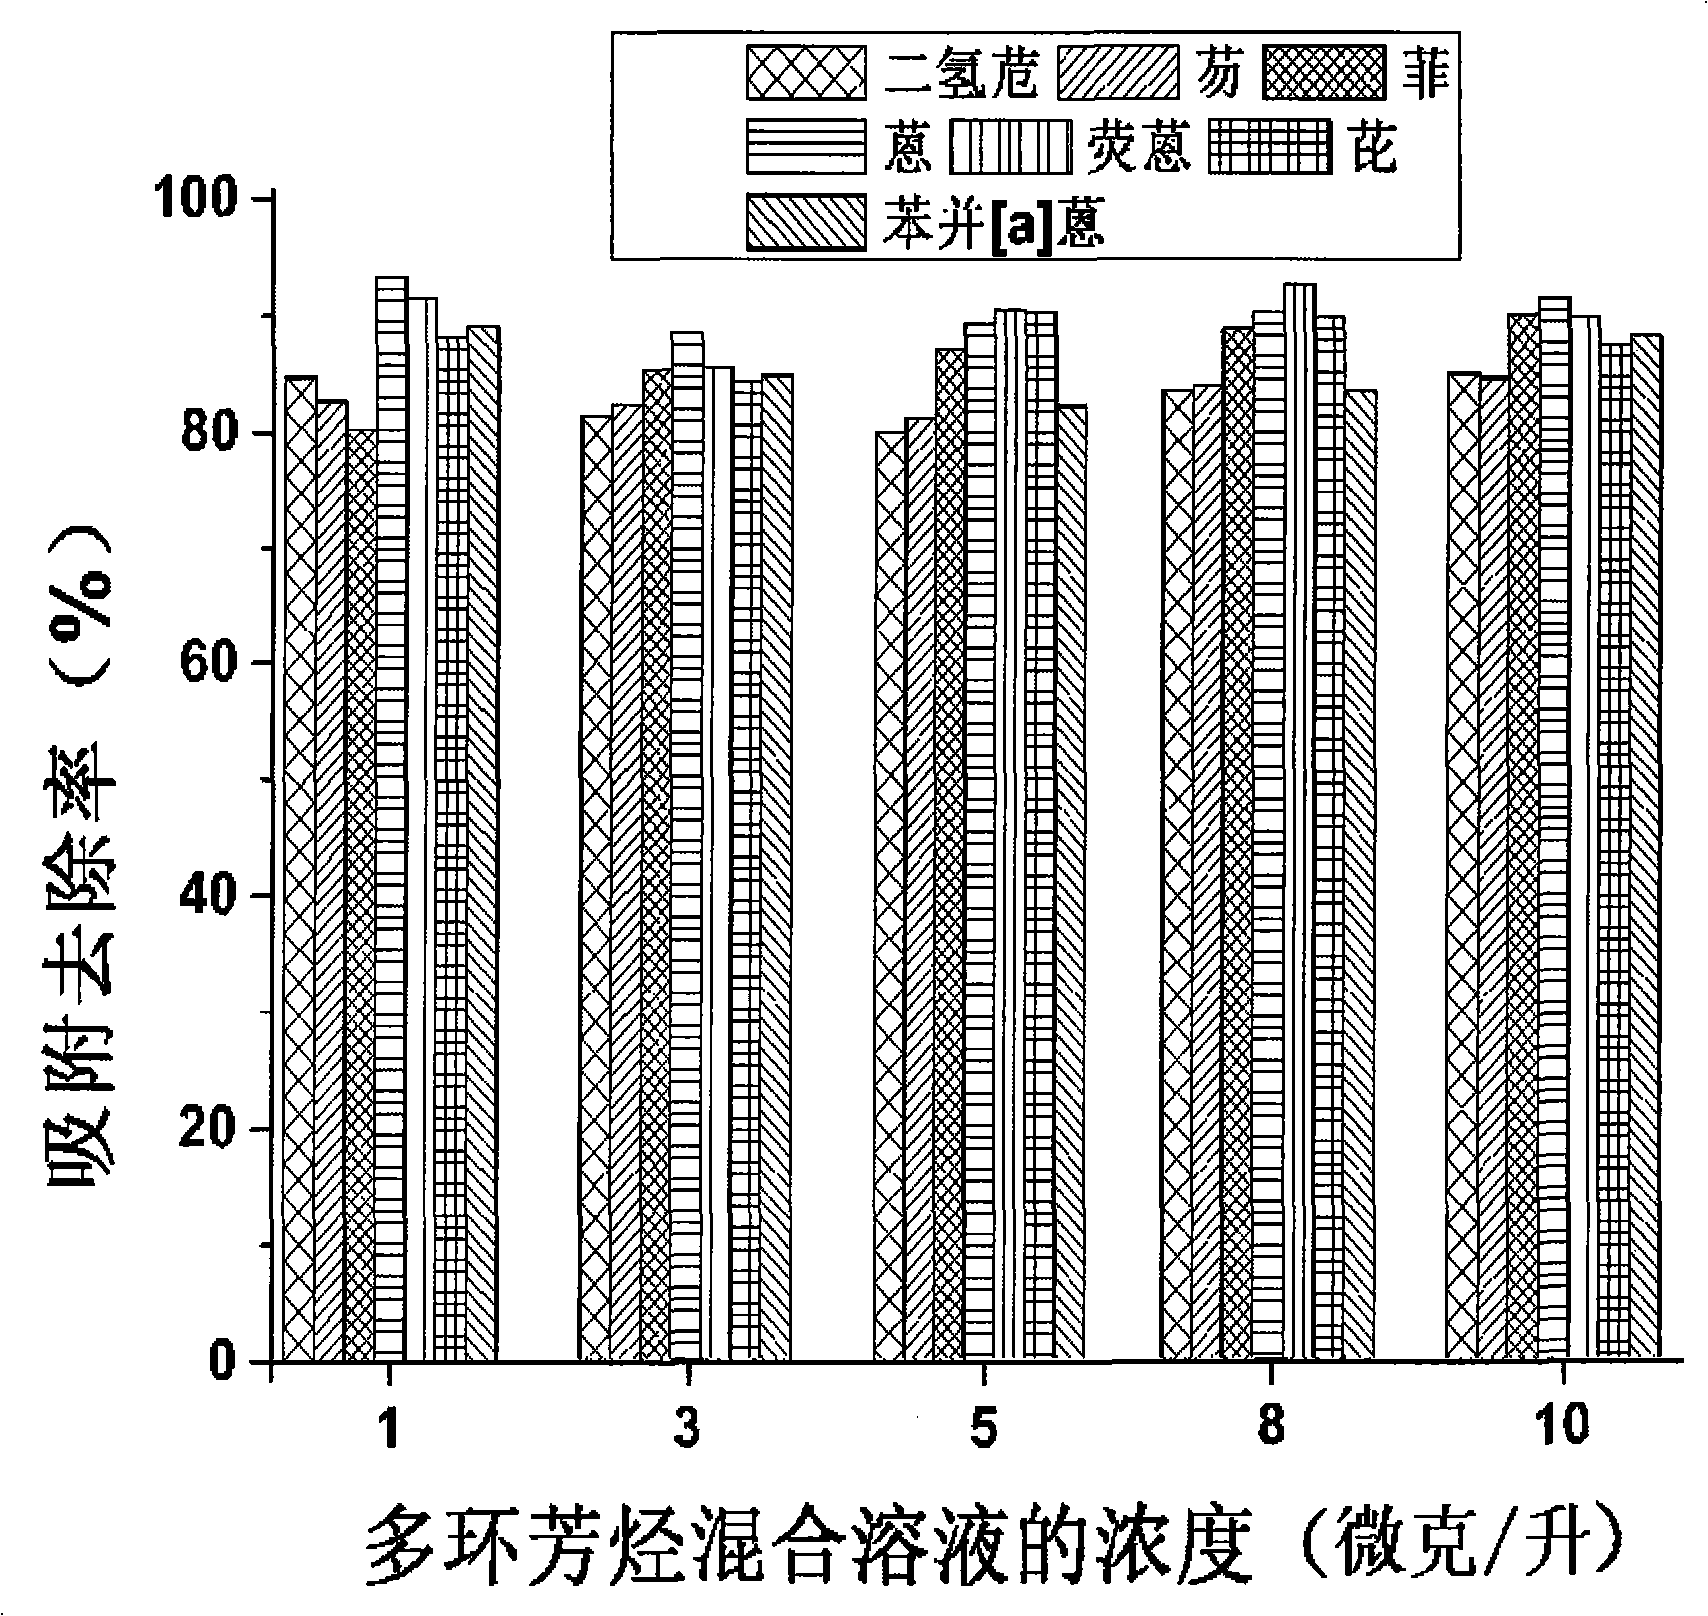 Method for removing trace polycyclic aromatic hydrocarbon from water through quick adsorption